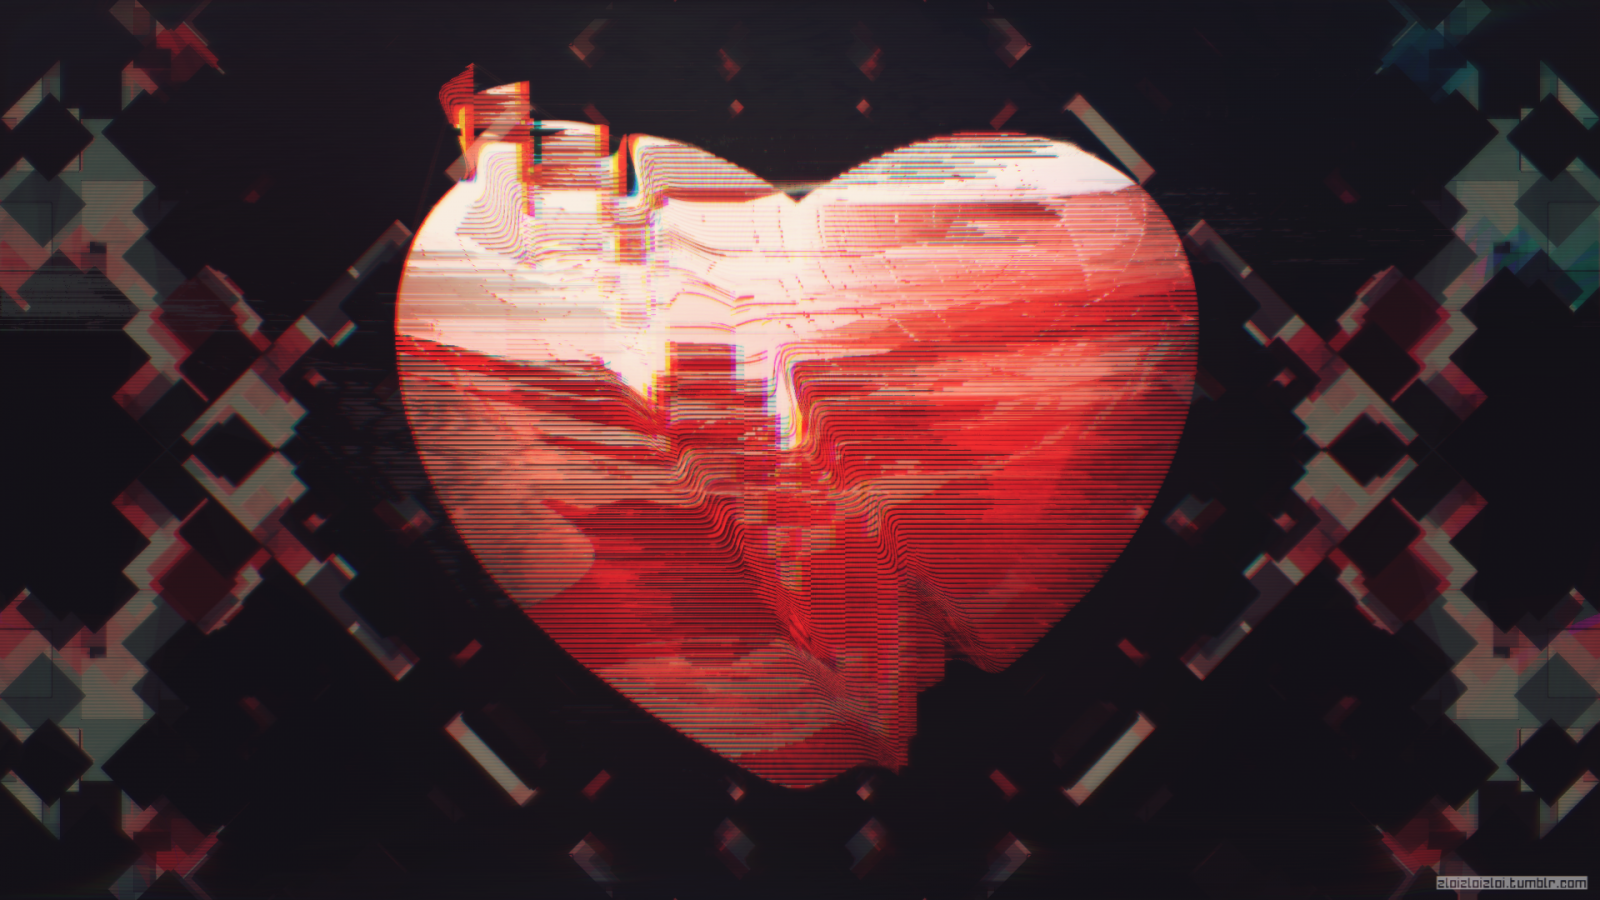 abstract, heart, red, glitch art, light, color, shape, stage, darkness, computer wallpaper, organ, special effects, album cover. Mocah HD Wallpaper